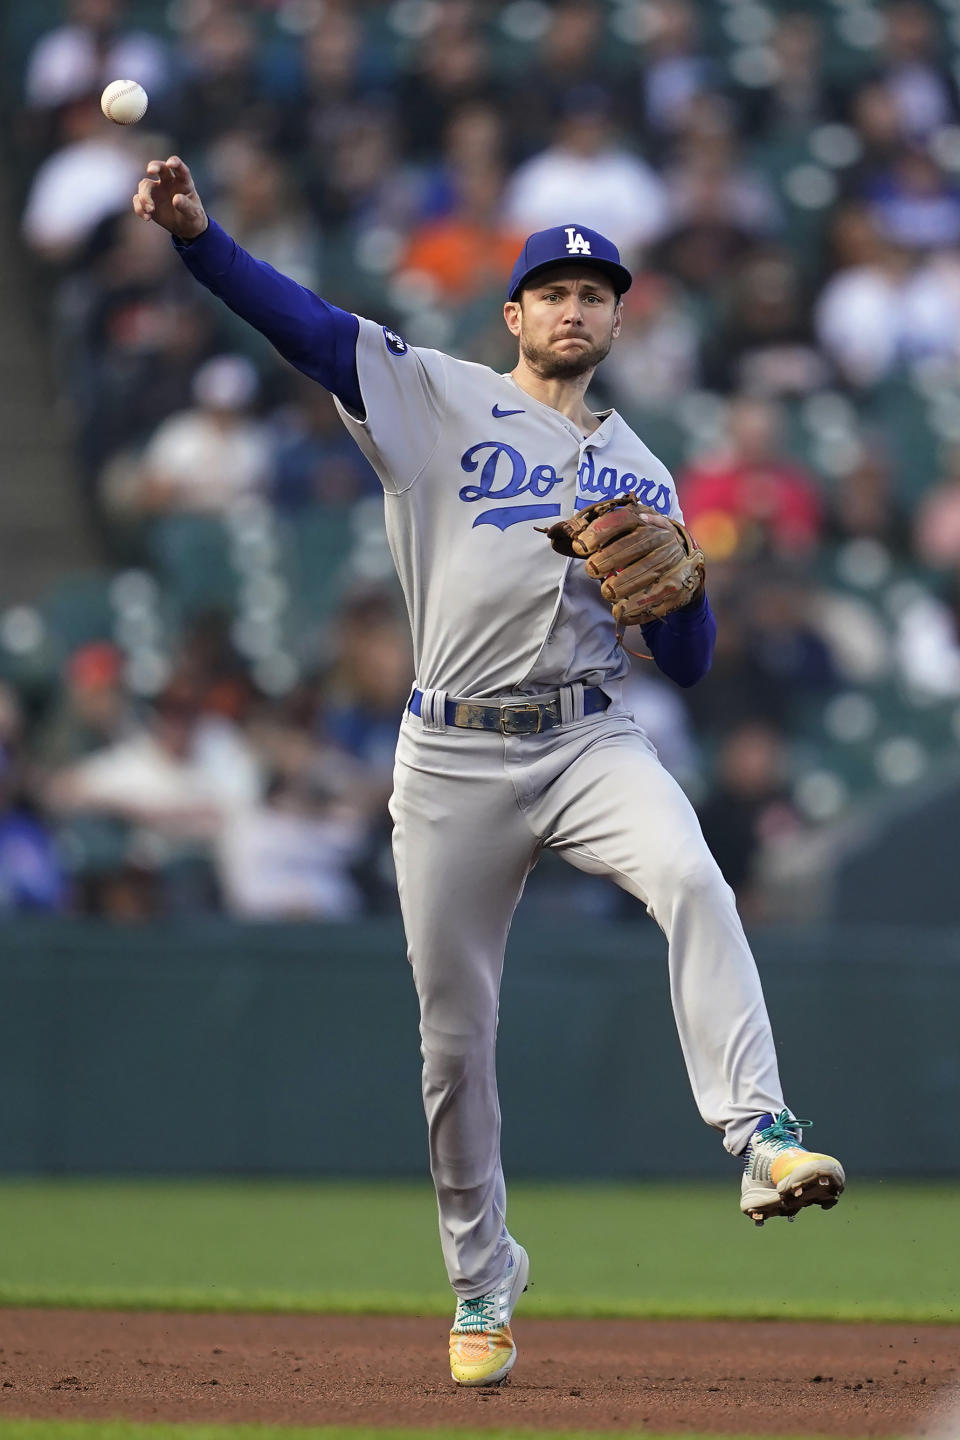 Los Angeles Dodgers shortstop Trea Turner throws out San Francisco Giants' Austin Slater at first base during the first inning of a baseball game in San Francisco, Wednesday, Aug. 3, 2022. (AP Photo/Jeff Chiu)